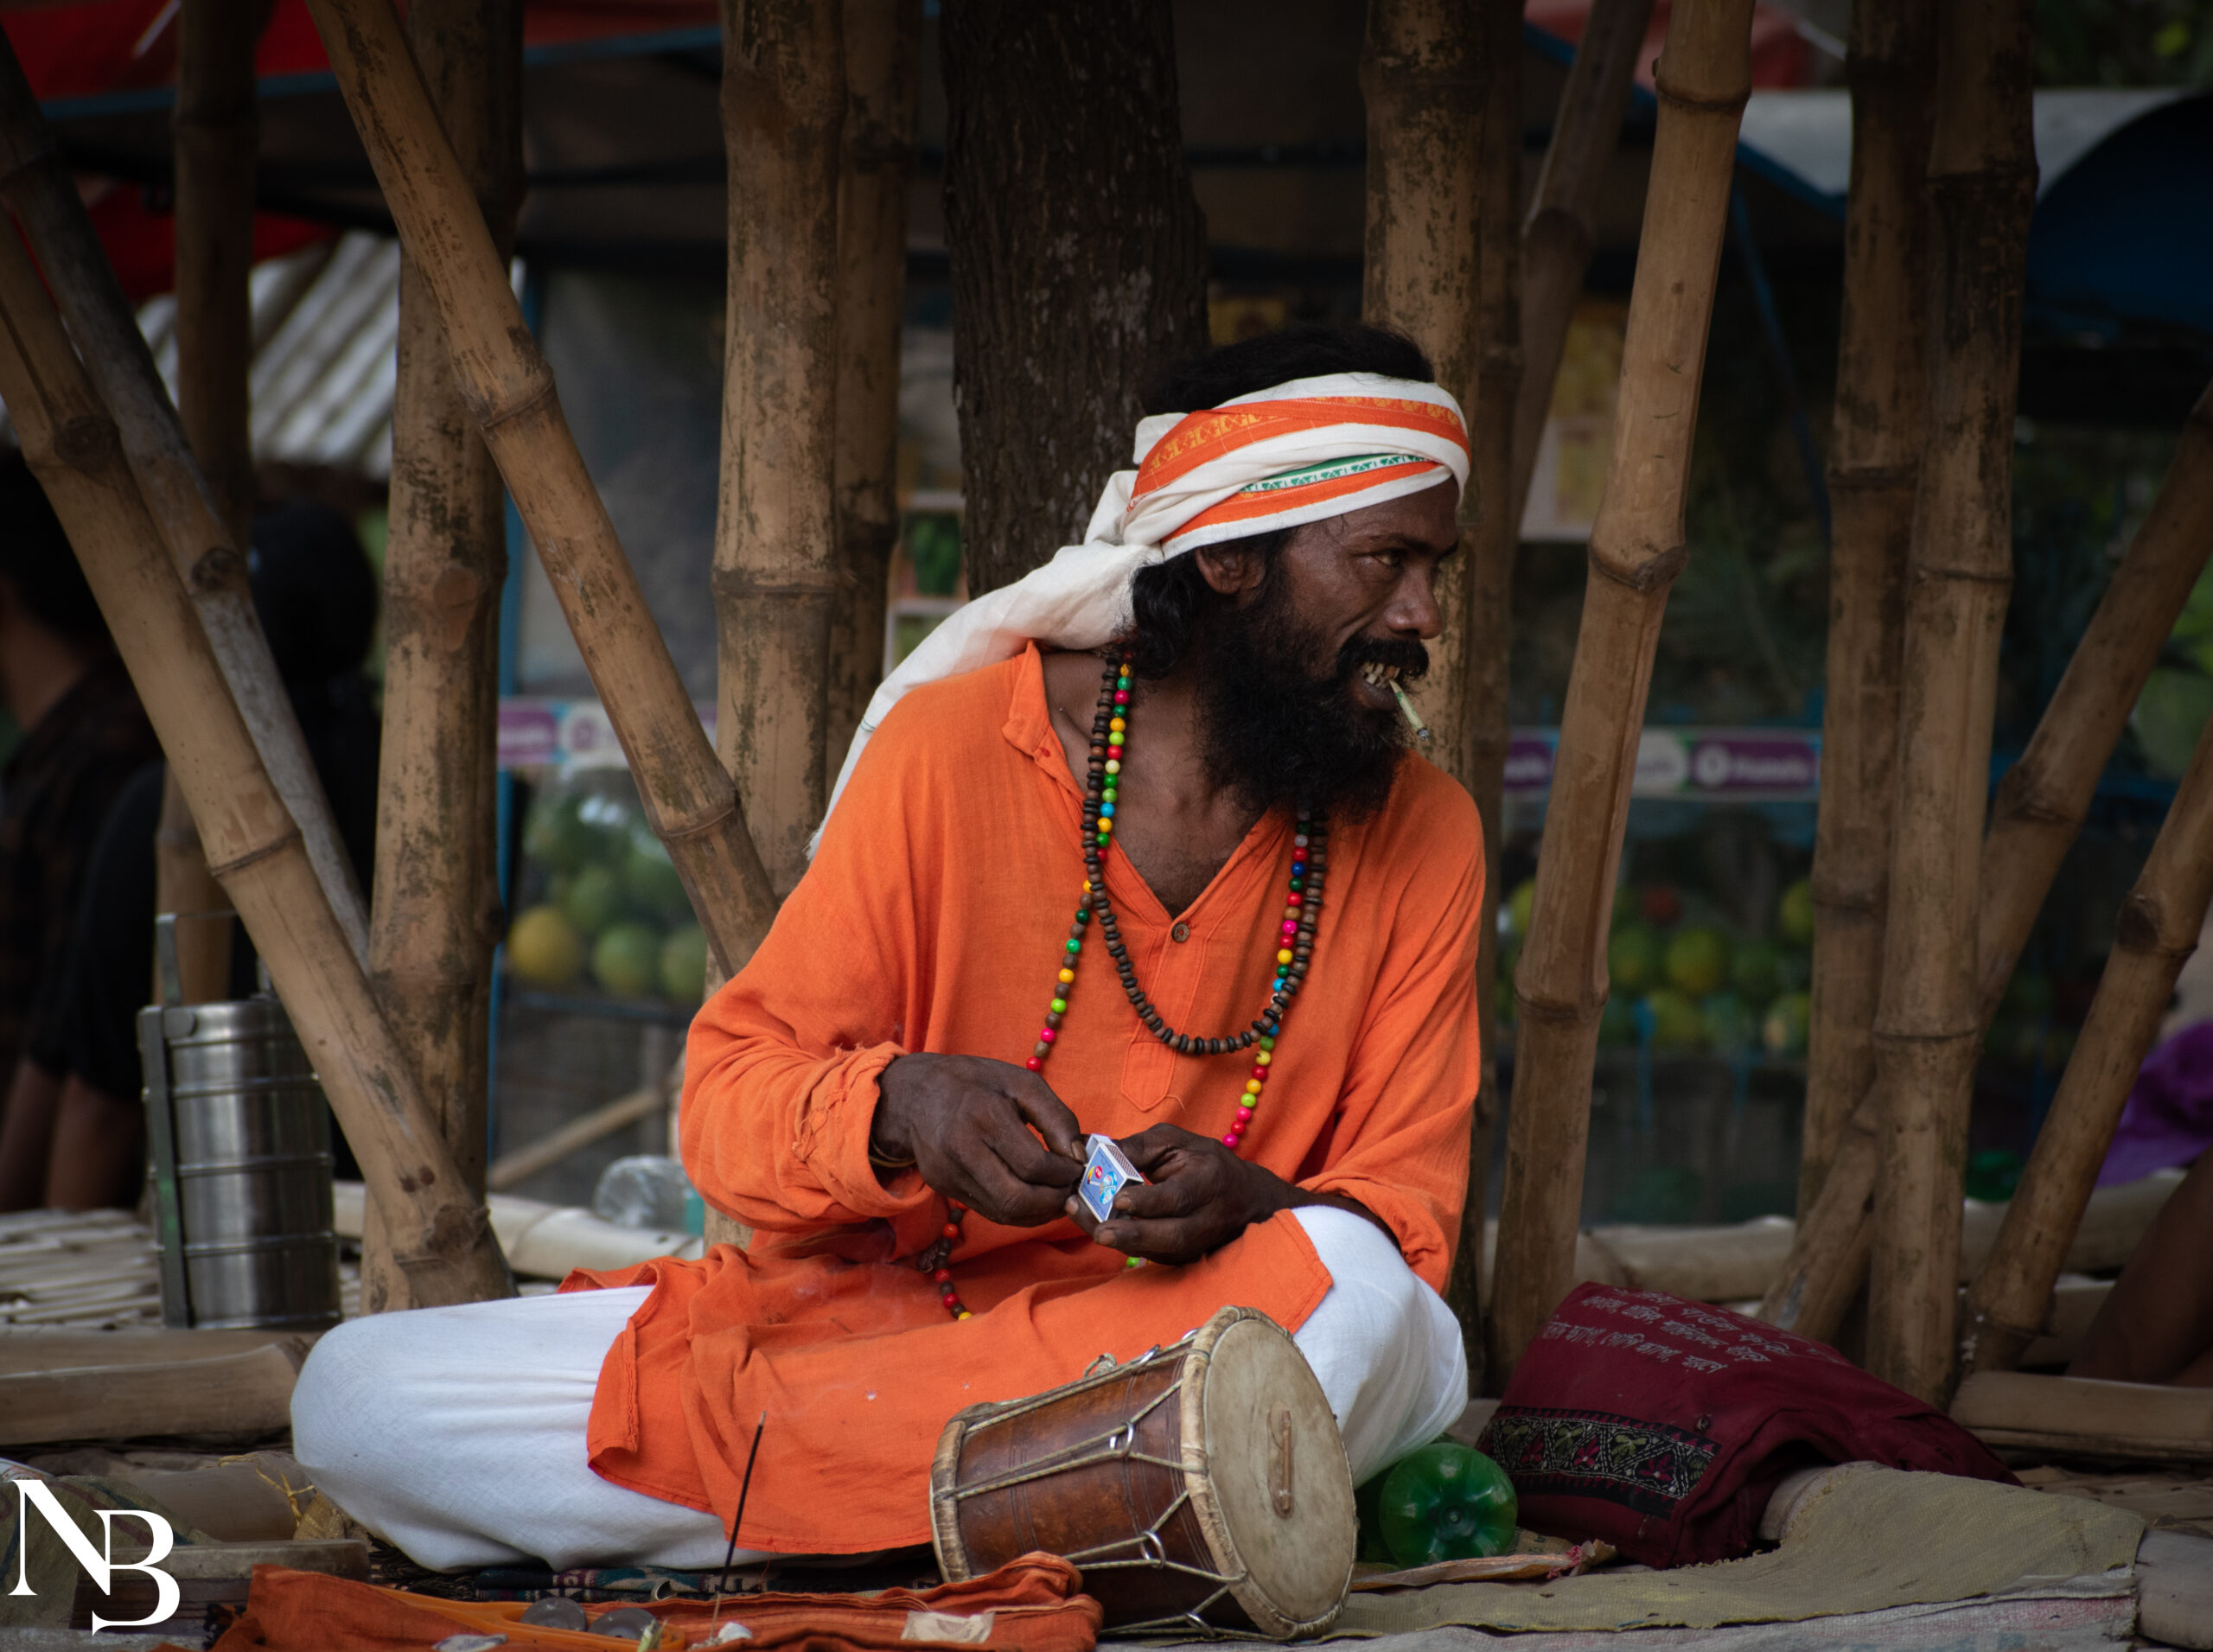 Image of Baul clicked during the Weekend trip to Shantiniketan